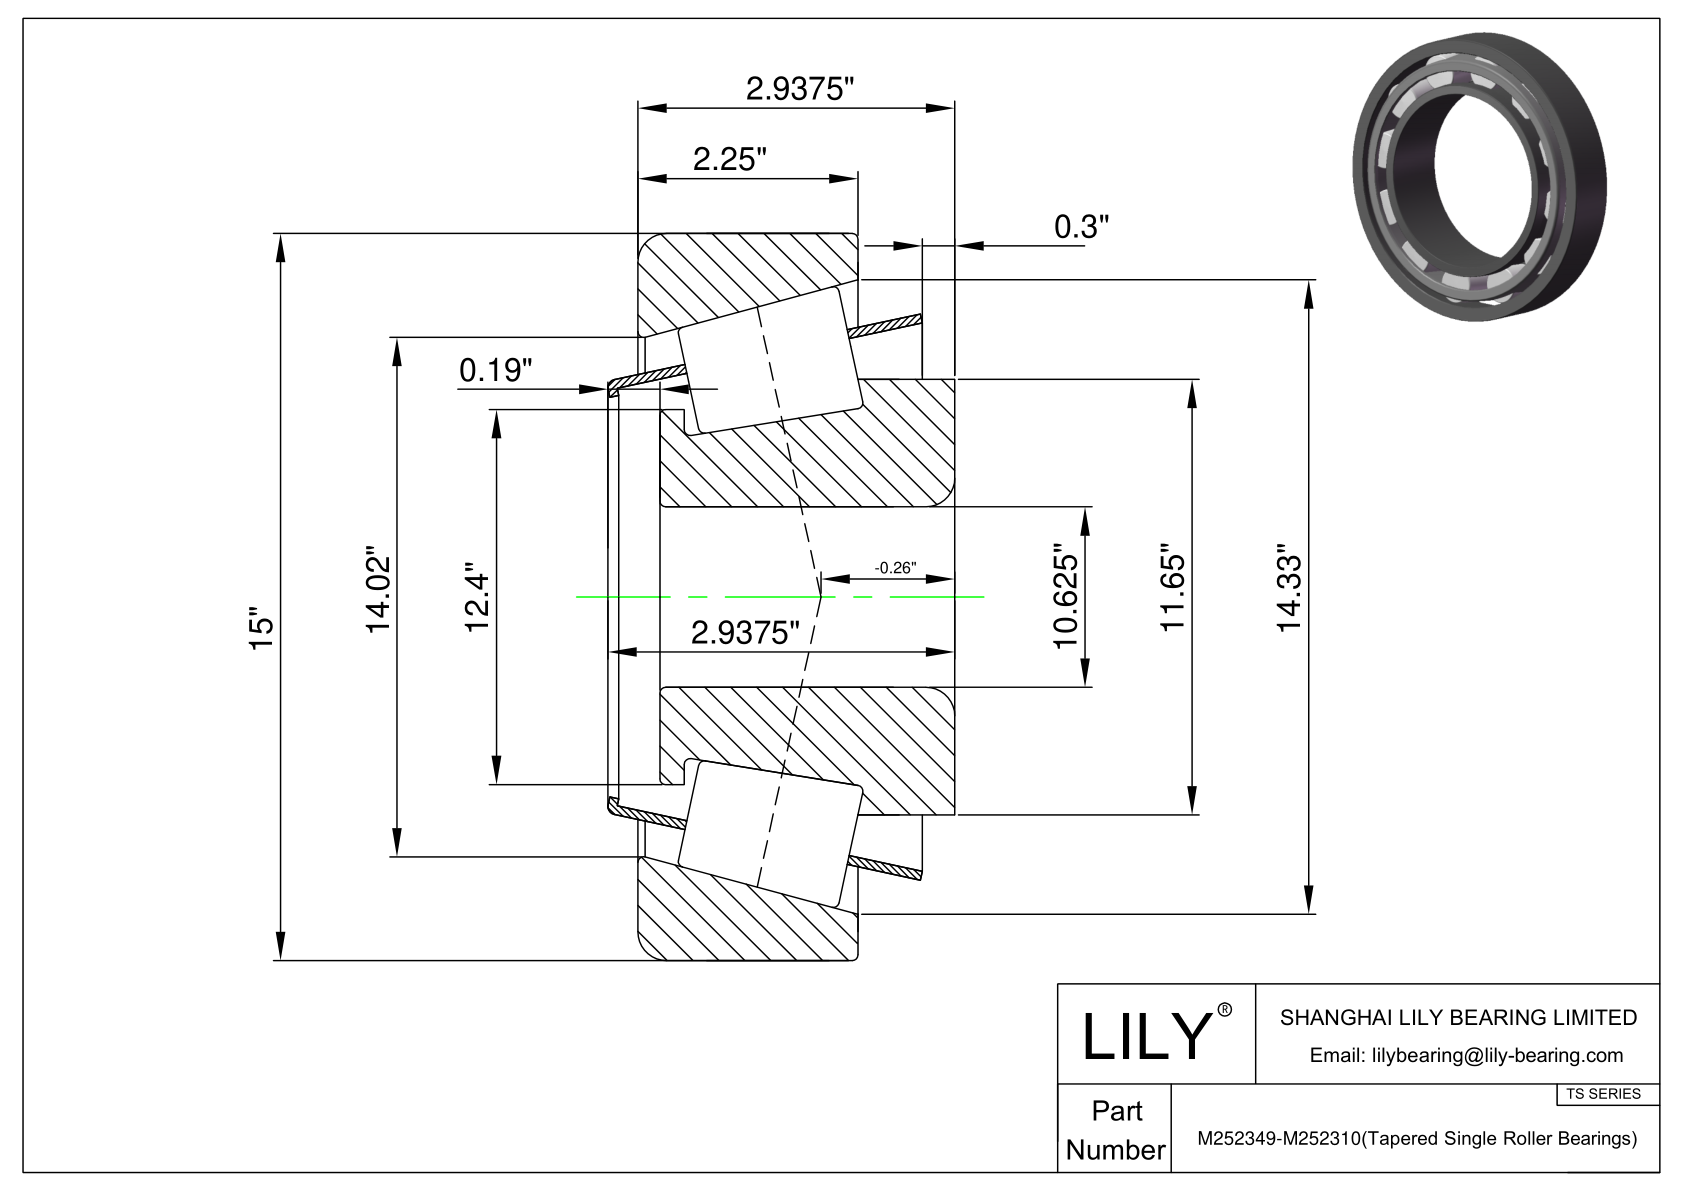 M252349-M252310 TS (Tapered Single Roller Bearings) (Imperial) cad drawing